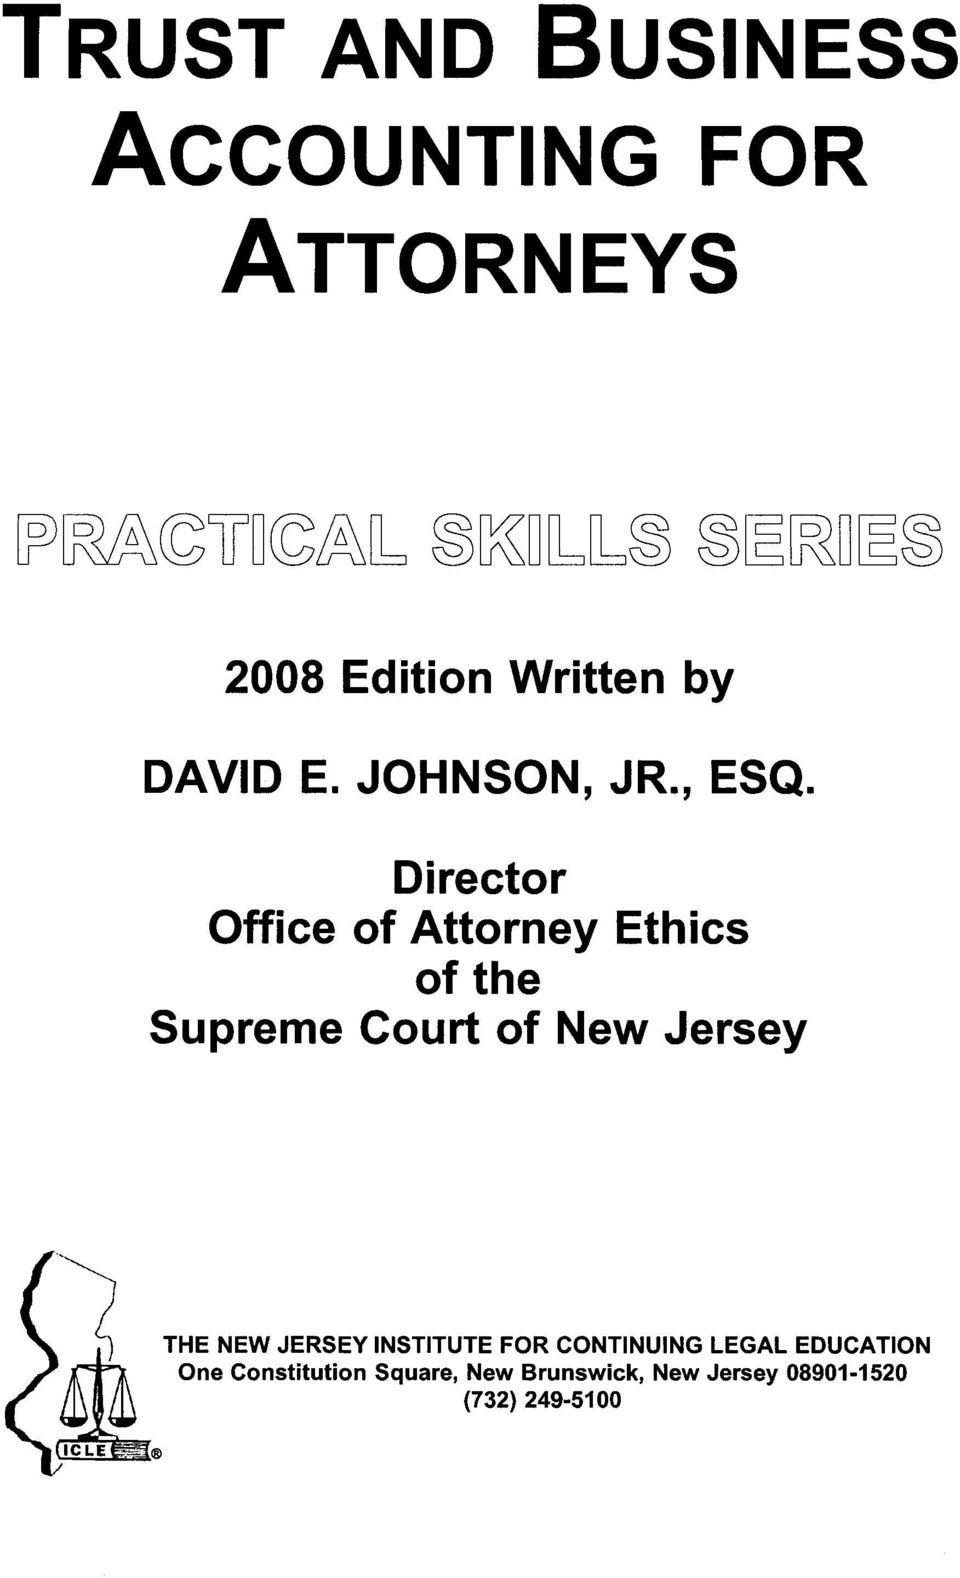 Director Office of Attorney Ethics of the Supreme Court of New Jersey.